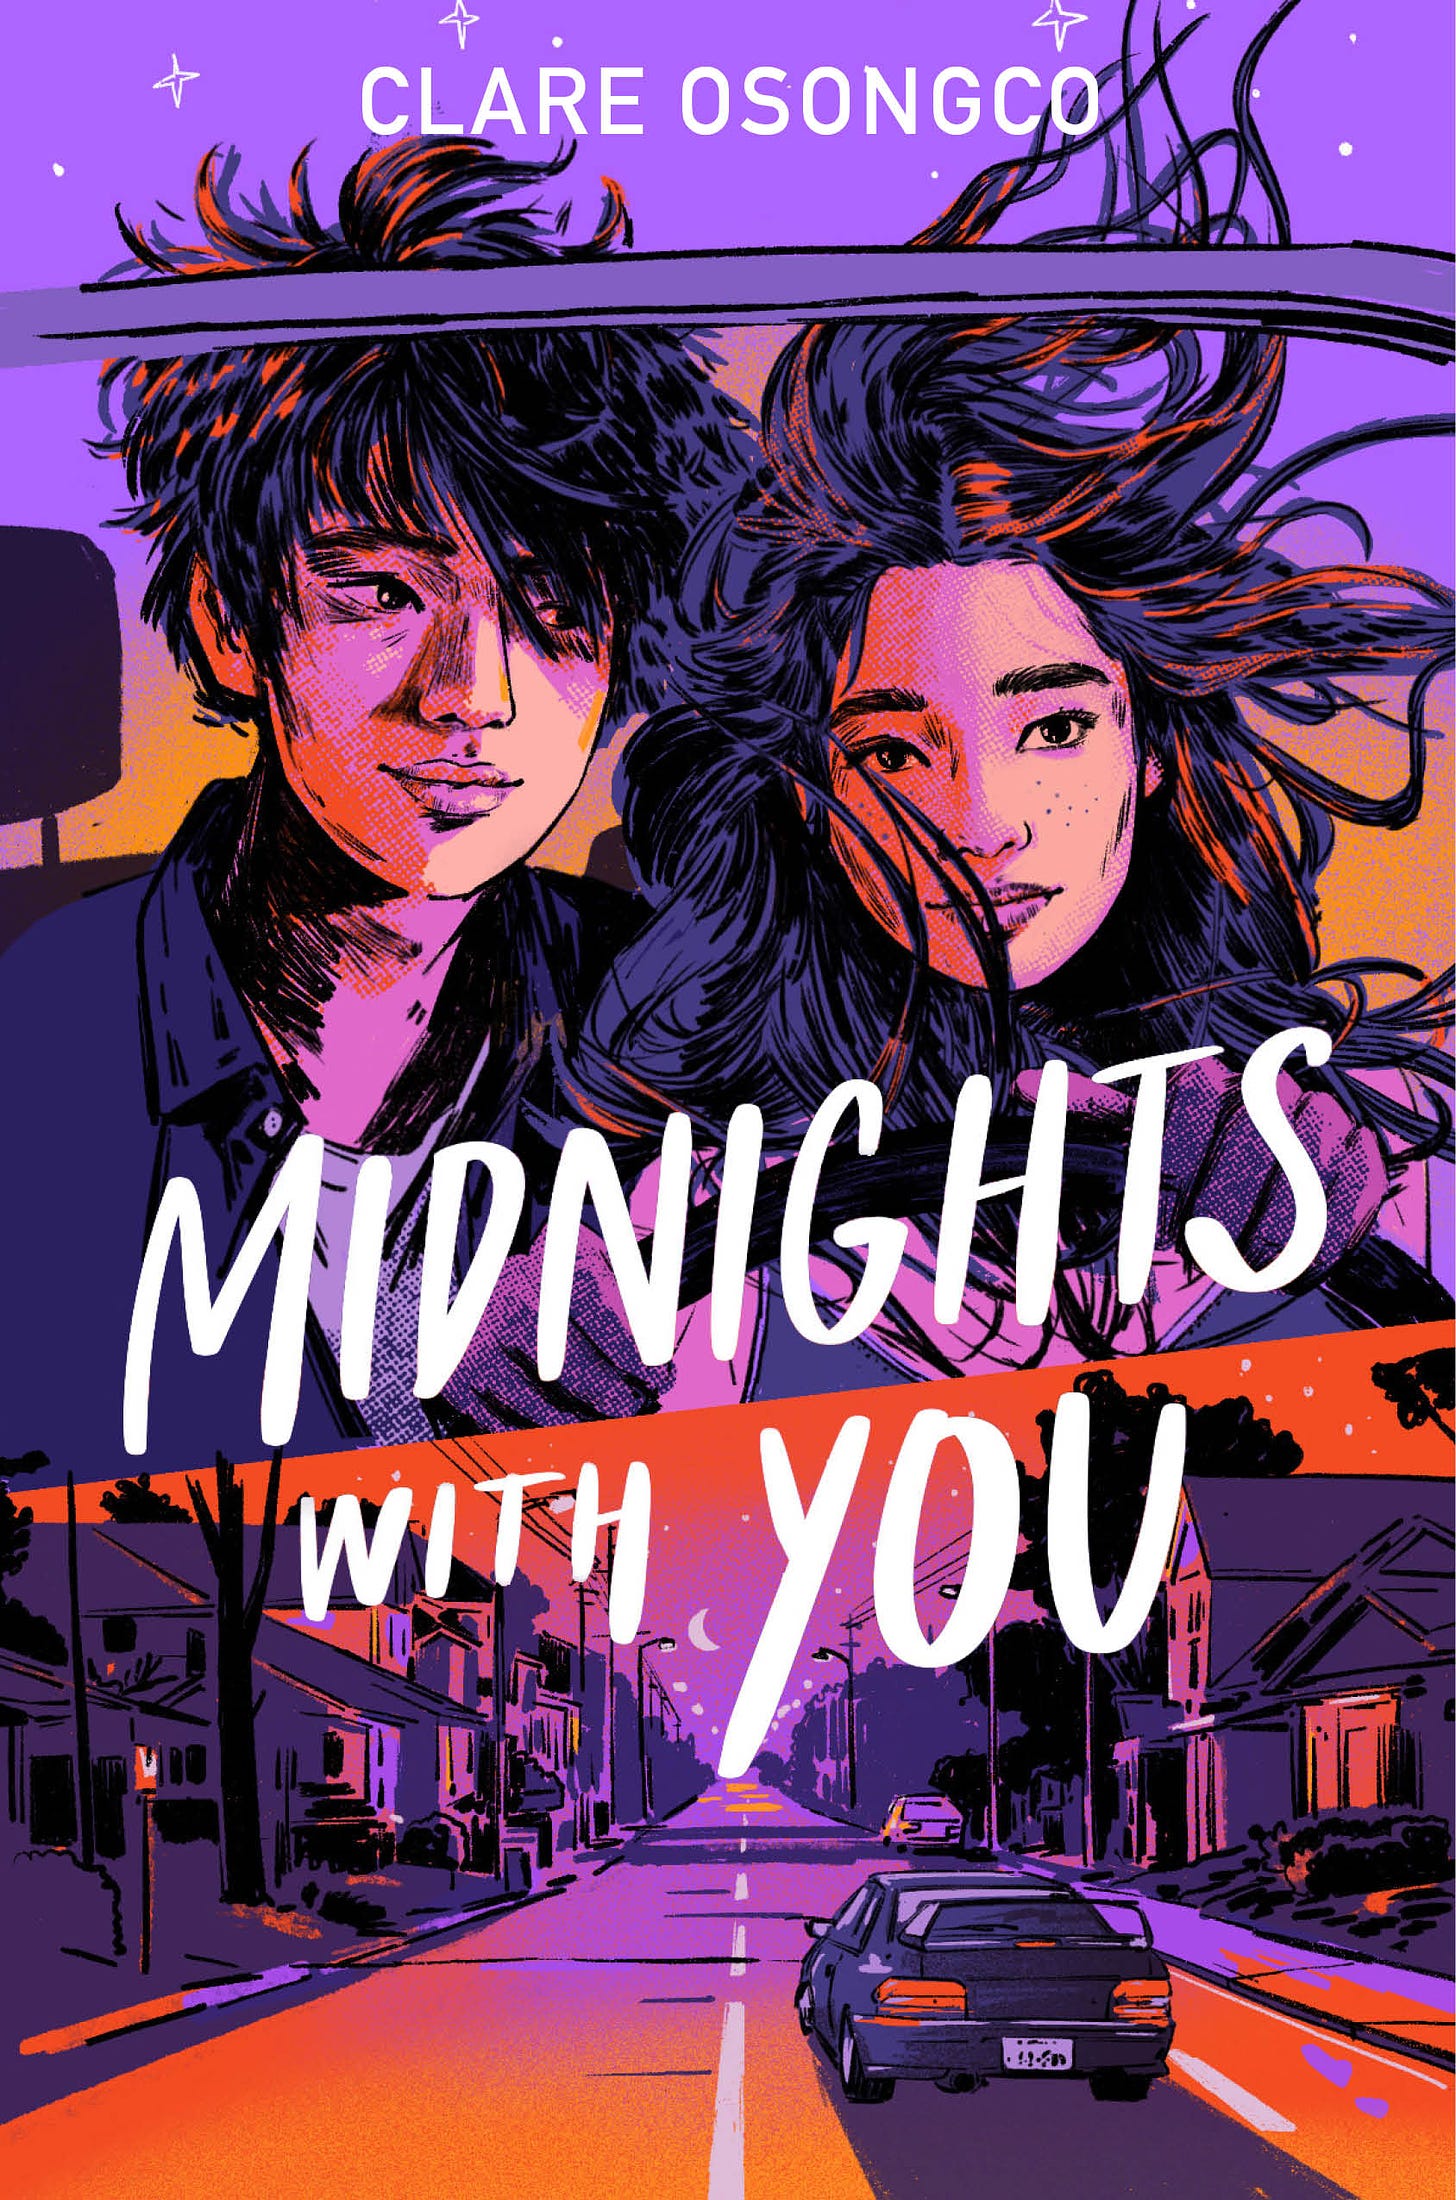 An illustration in shades of purple and pink and orange, where the upper half shows two biracial Asian American teenagers—a mixed Viet boy and a mixed Filipino girl with the wind blowing through their hair. She’s behind the wheel of a car, and you can see the car seat head rests behind them, but the interior of the car fades into a warm orange glow. The bottom half of the illustration shows a nighttime suburban streetscape with the car driving down the street into the distance. (It’s a 2004 Subaru Impreza WRX STI). Across the middle, in lettering that looks like handwriting, is the title all in uppercase: MIDNIGHTS WITH YOU. The author’s name is across the top, along with some little whimsical-looking stars.